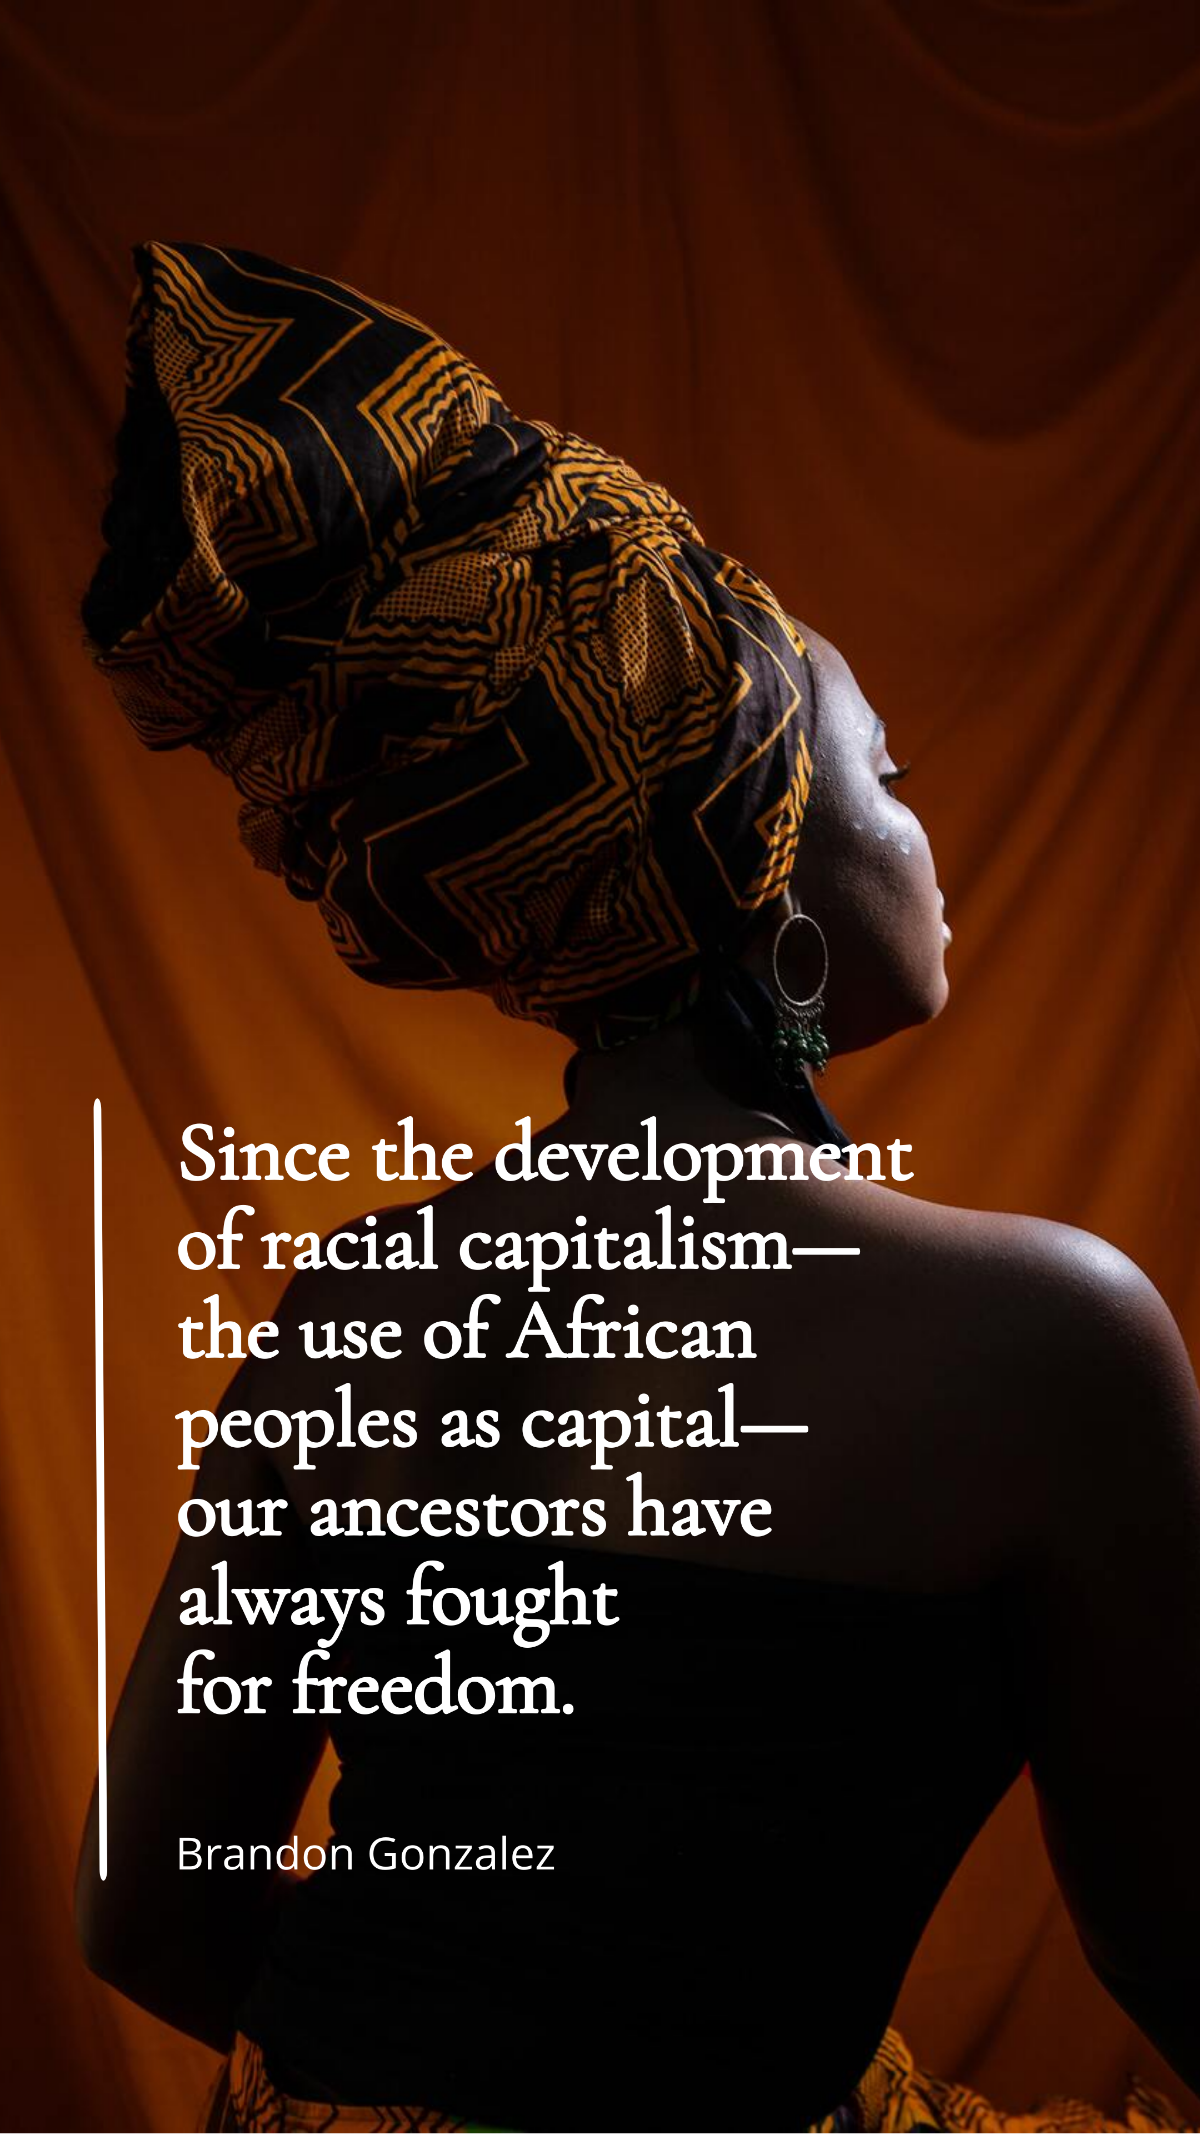 Brandon Gonzalez - Since the development of racial capitalism—the use of African peoples as capital—our ancestors have always fought for freedom. Template